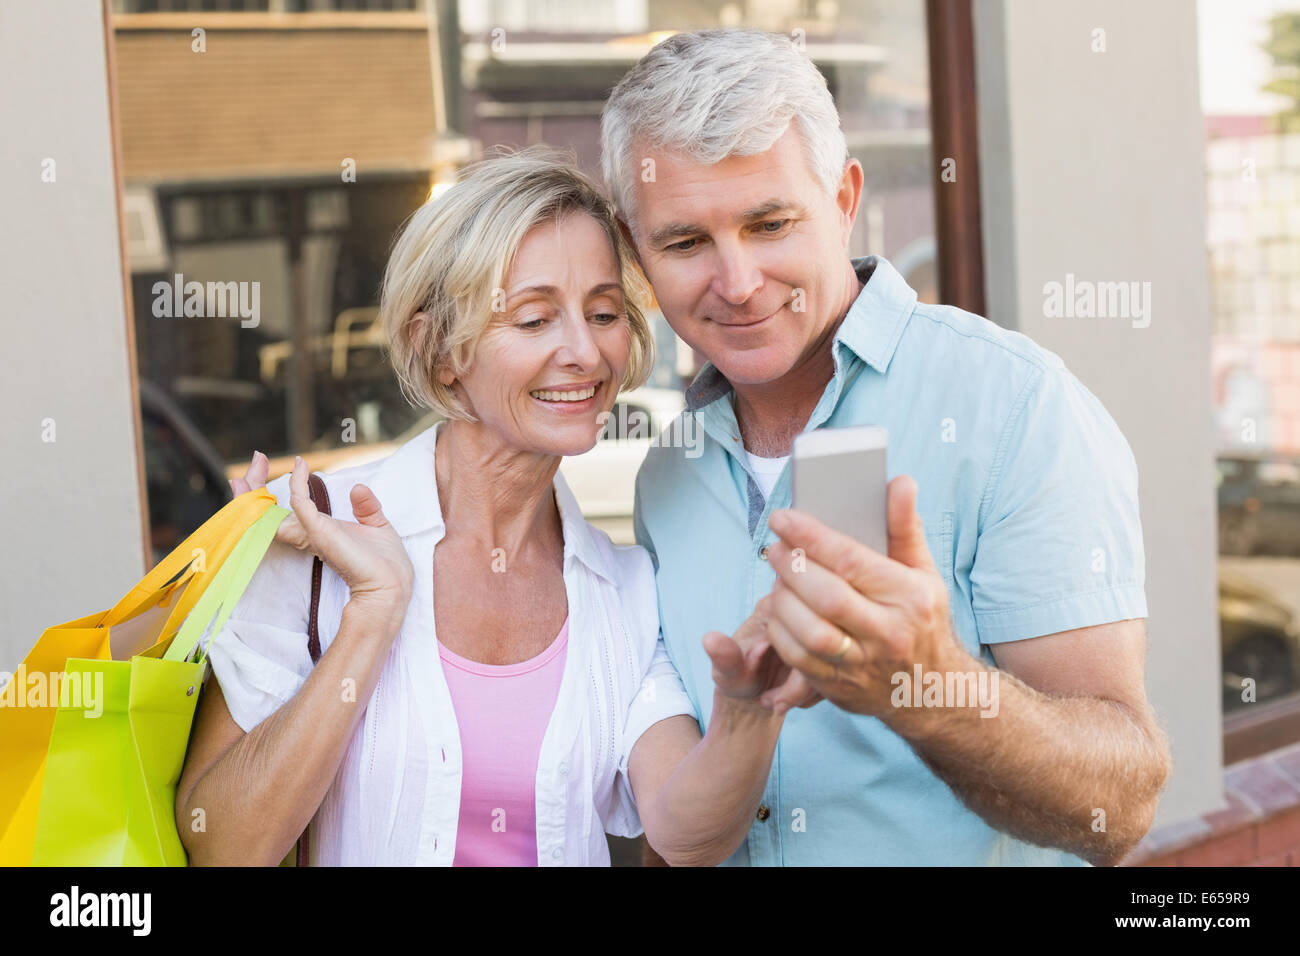 Happy mature couple looking at smartphone together Stock Photo